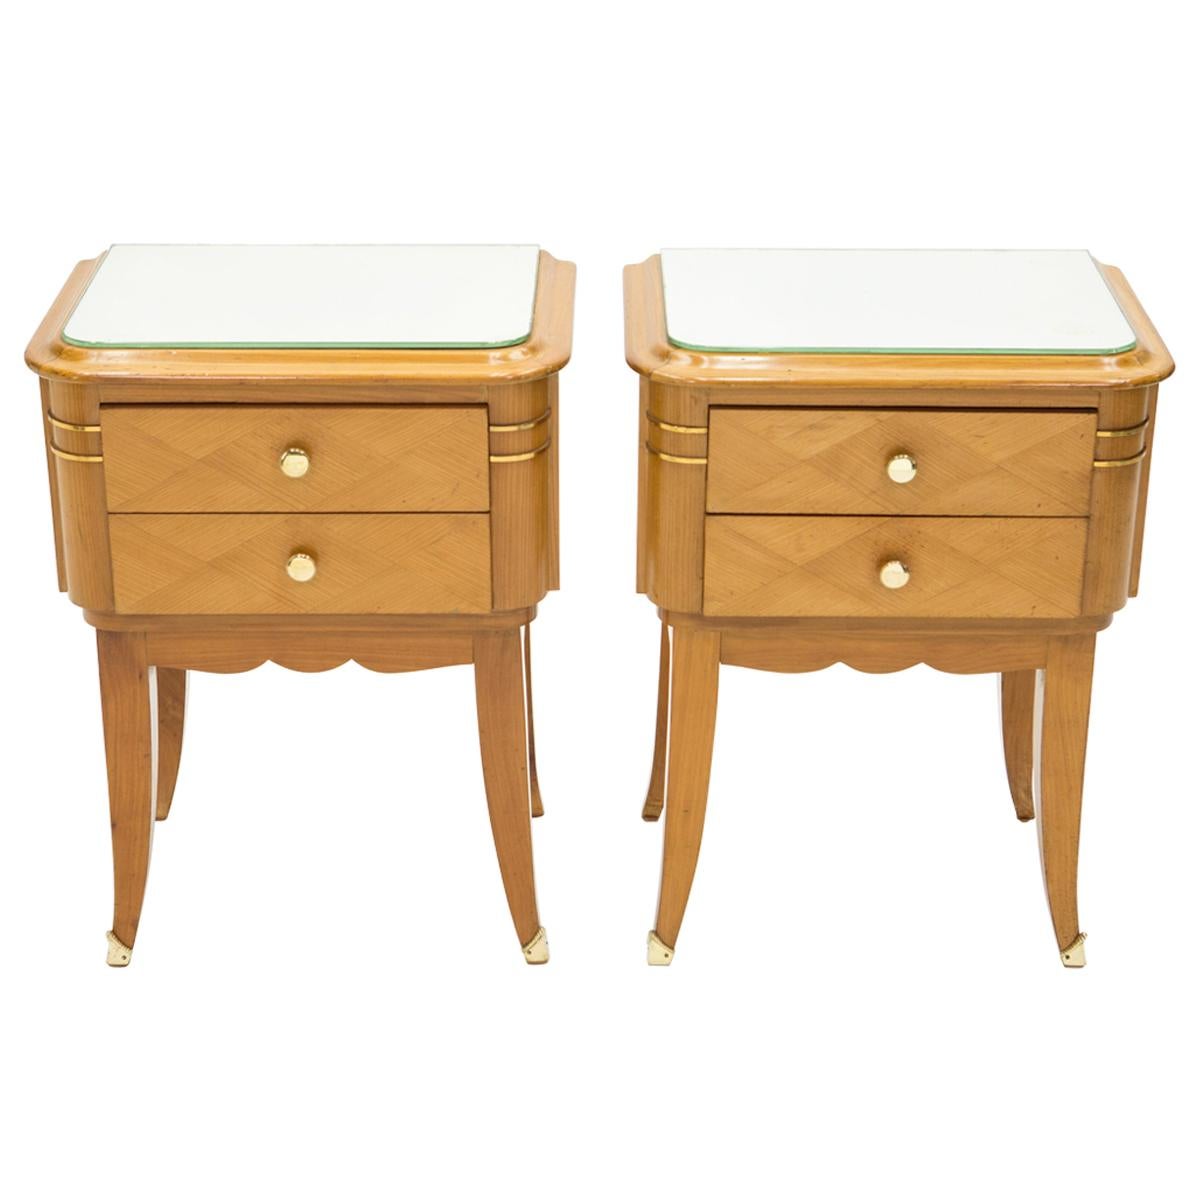 French Sycamore Brass Nightstands 2 Drawers by Jean Pascaud, 1940s